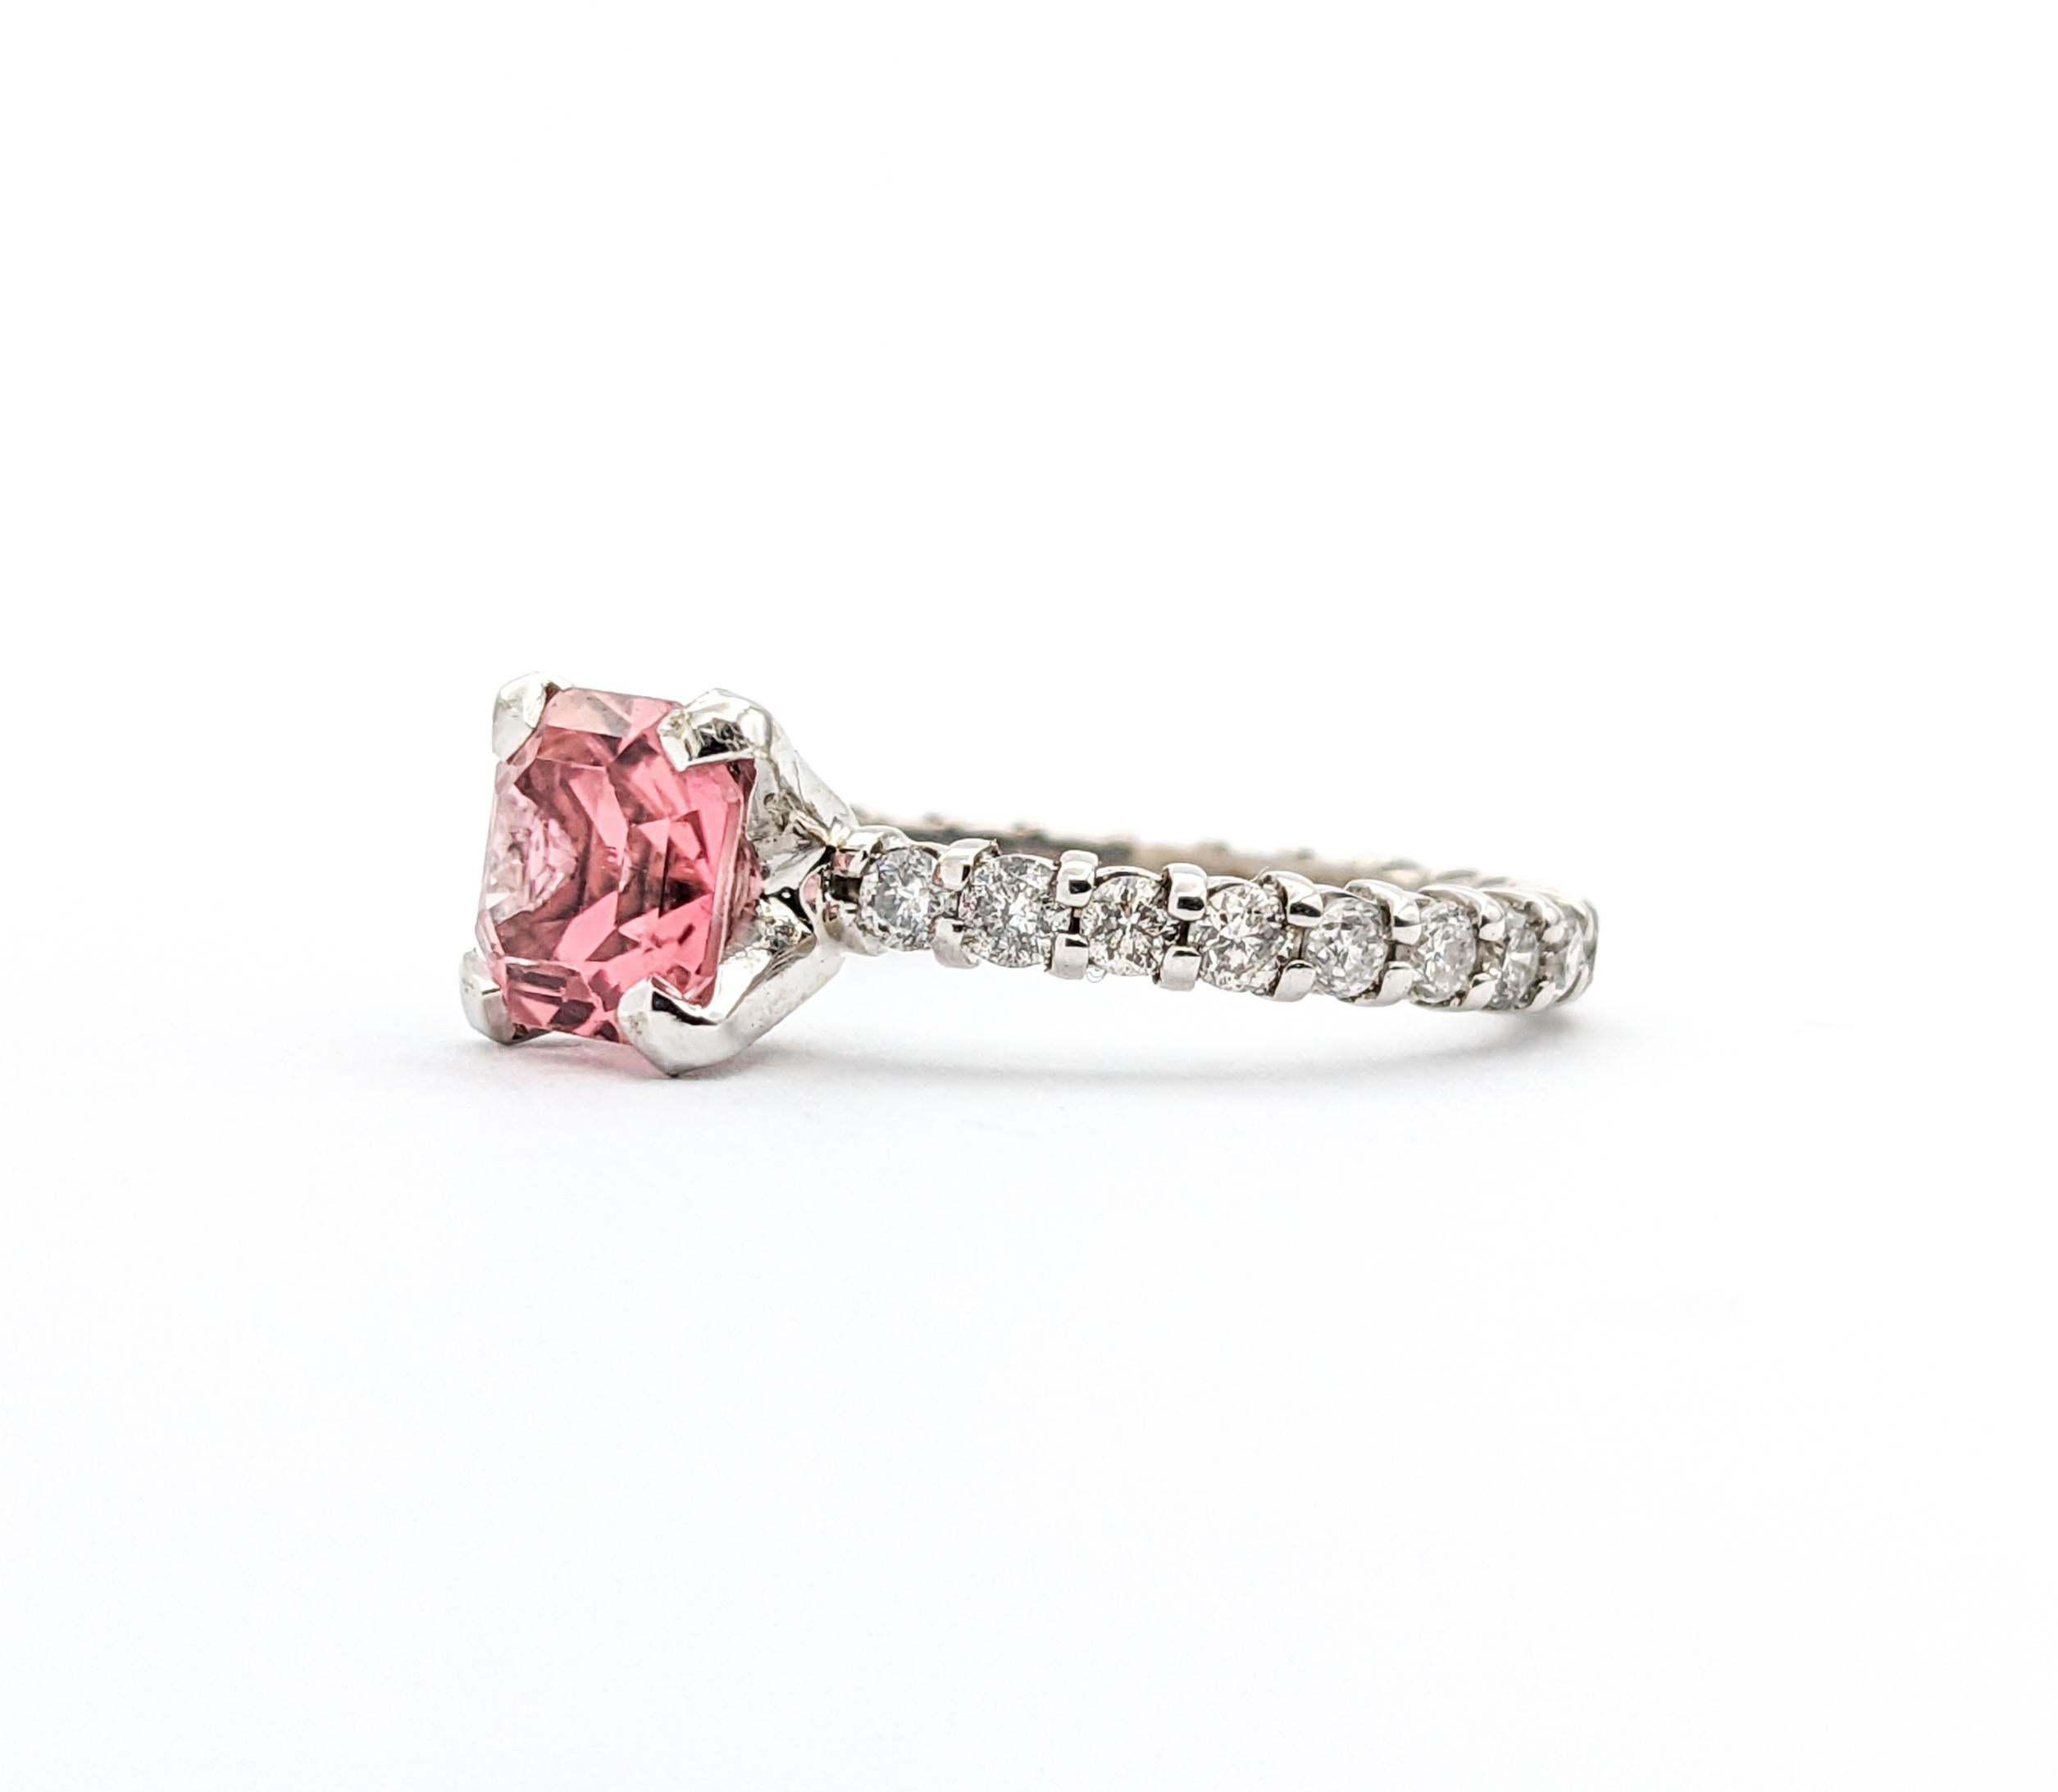 1.17ct Pink Tourmaline & Diamond Ring In White Gold

Discover the allure of our stunning ring, masterfully crafted in 14kt white gold. This exquisite piece showcases .60ctw of sparkling diamonds, each with I1 clarity and H-I color, radiating